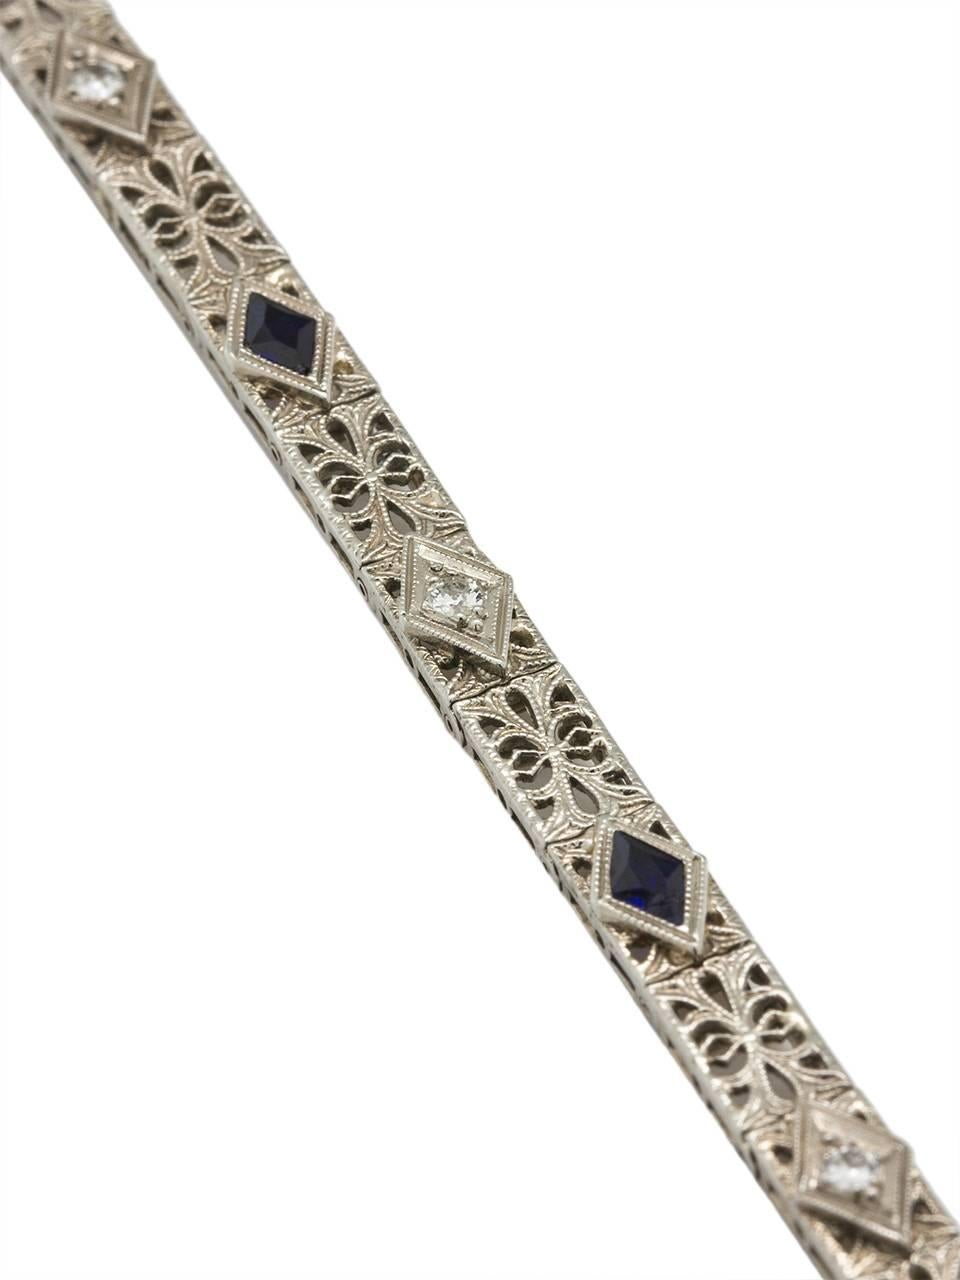 Elegant 18k white gold straight-line diamond and synthetic sapphire bracelet, with intricate filigree latticework in a romantic floral motif design. Two transitional cut round diamonds weighing approximately .15ct alternating with two synthetic